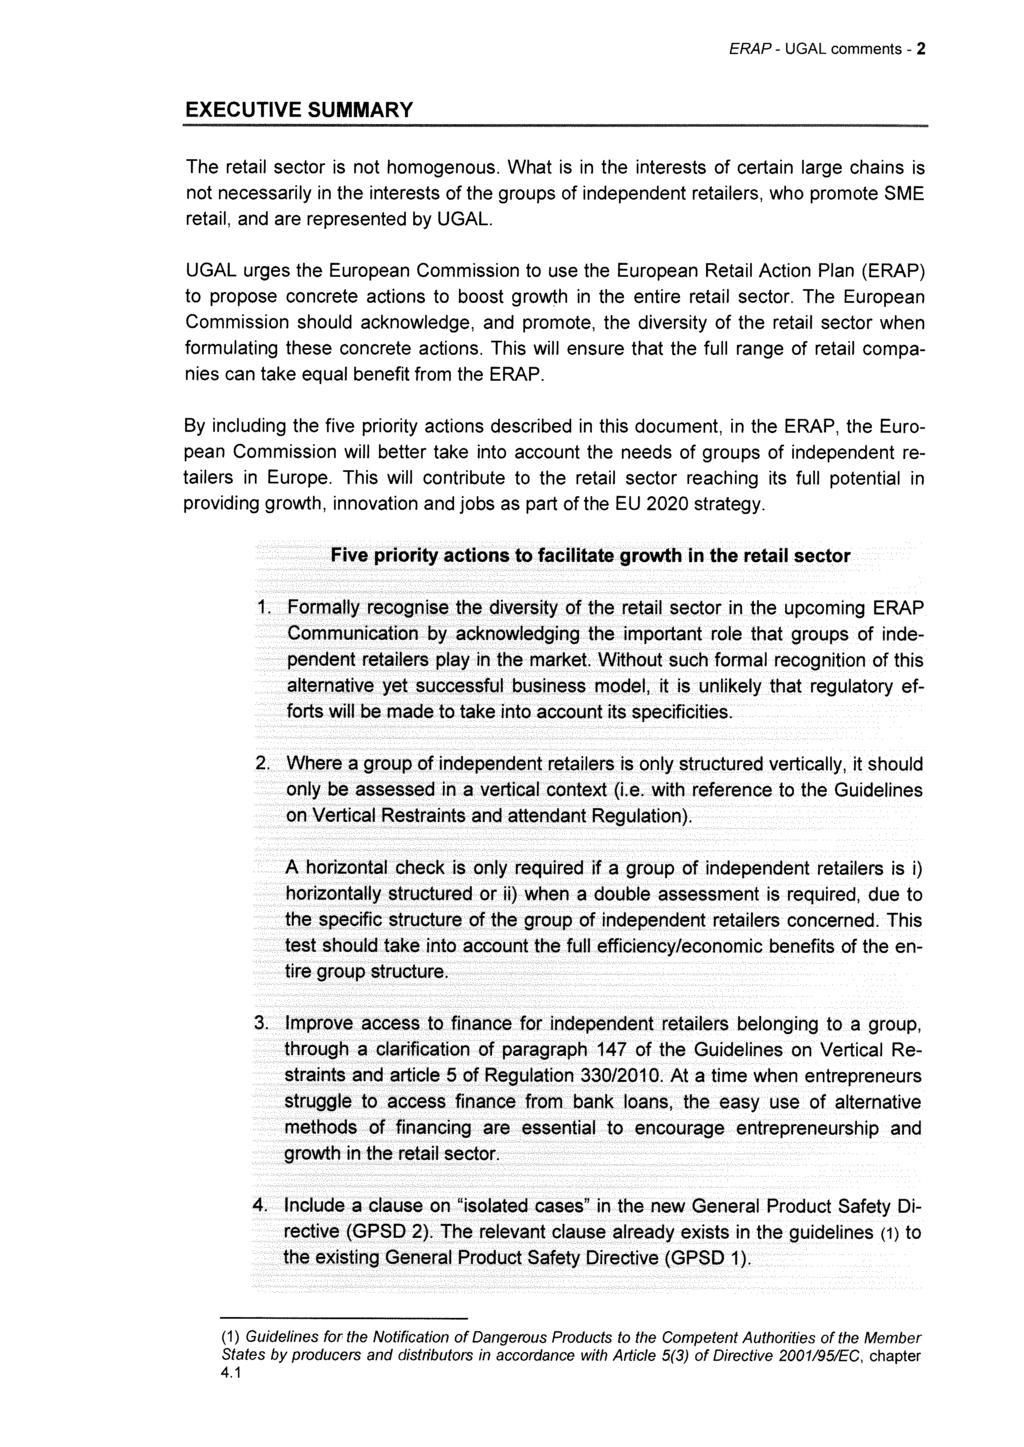 ERAP - UGAL comments - 2 EXECUTIVE SUMMARY The retail sector is not homogenous.